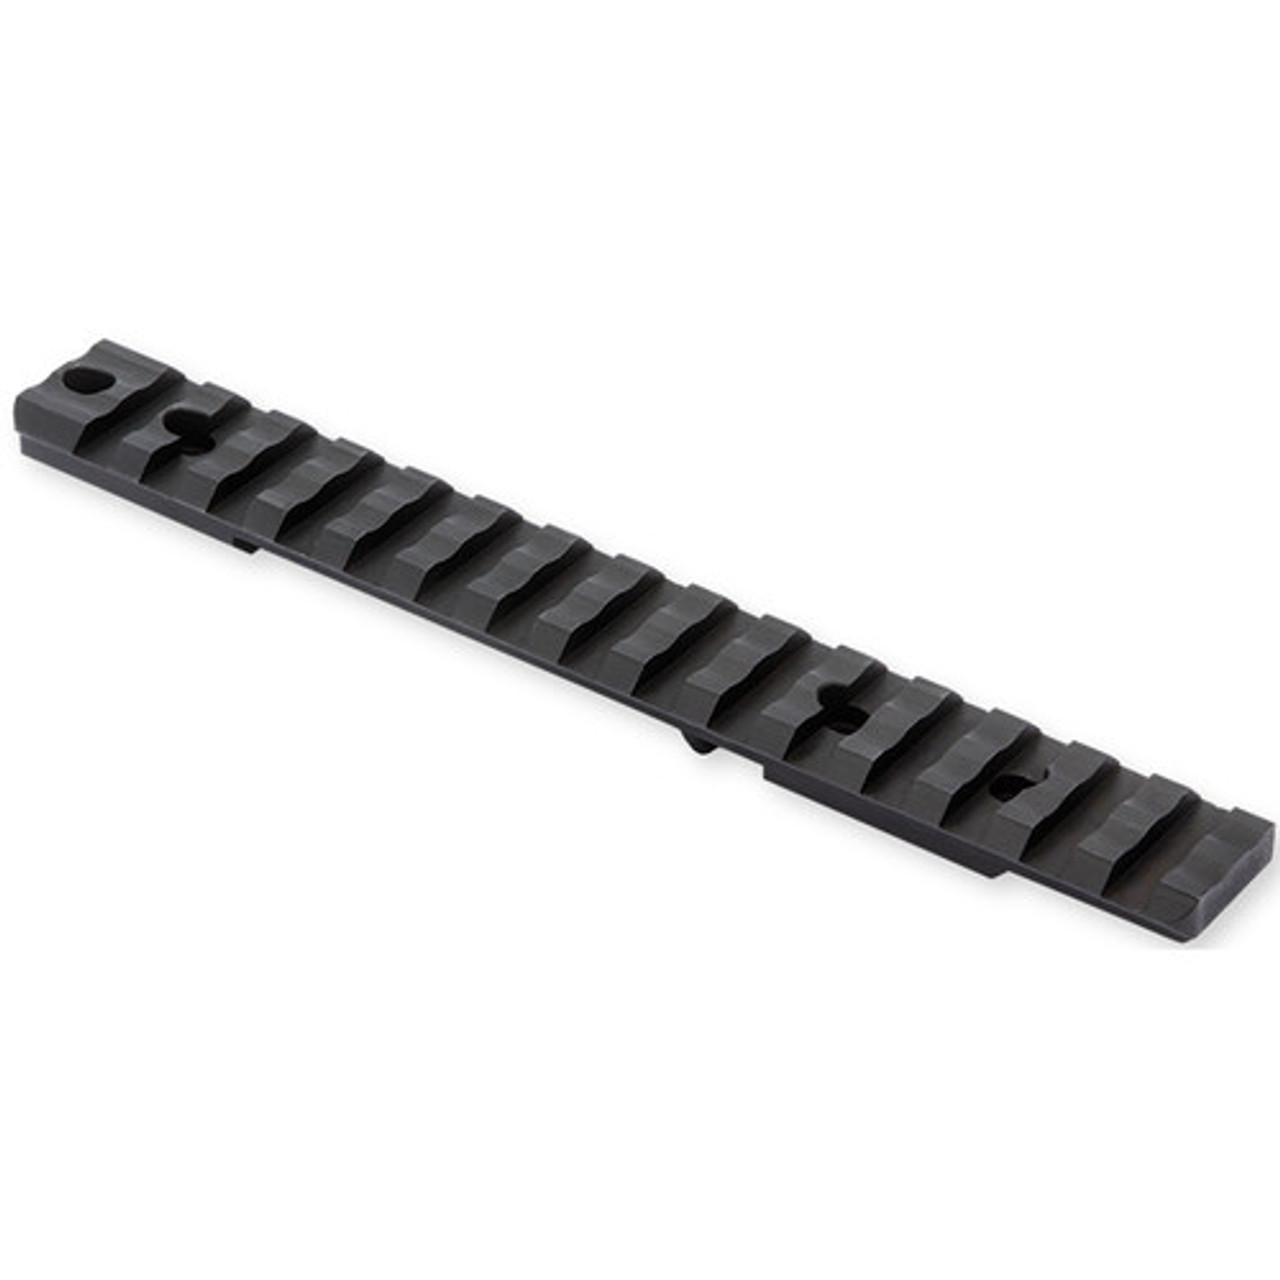 The Xtreme Tactical one-piece base offers the perfect mounting solution for precision shooters.

The one-piece construction provides greater strength and rigidity.
Milled from a single piece of solid steel
Compatible with all Weaver-style, Picatinny-style rings
Designed to work with both short and long actions
Matte finish